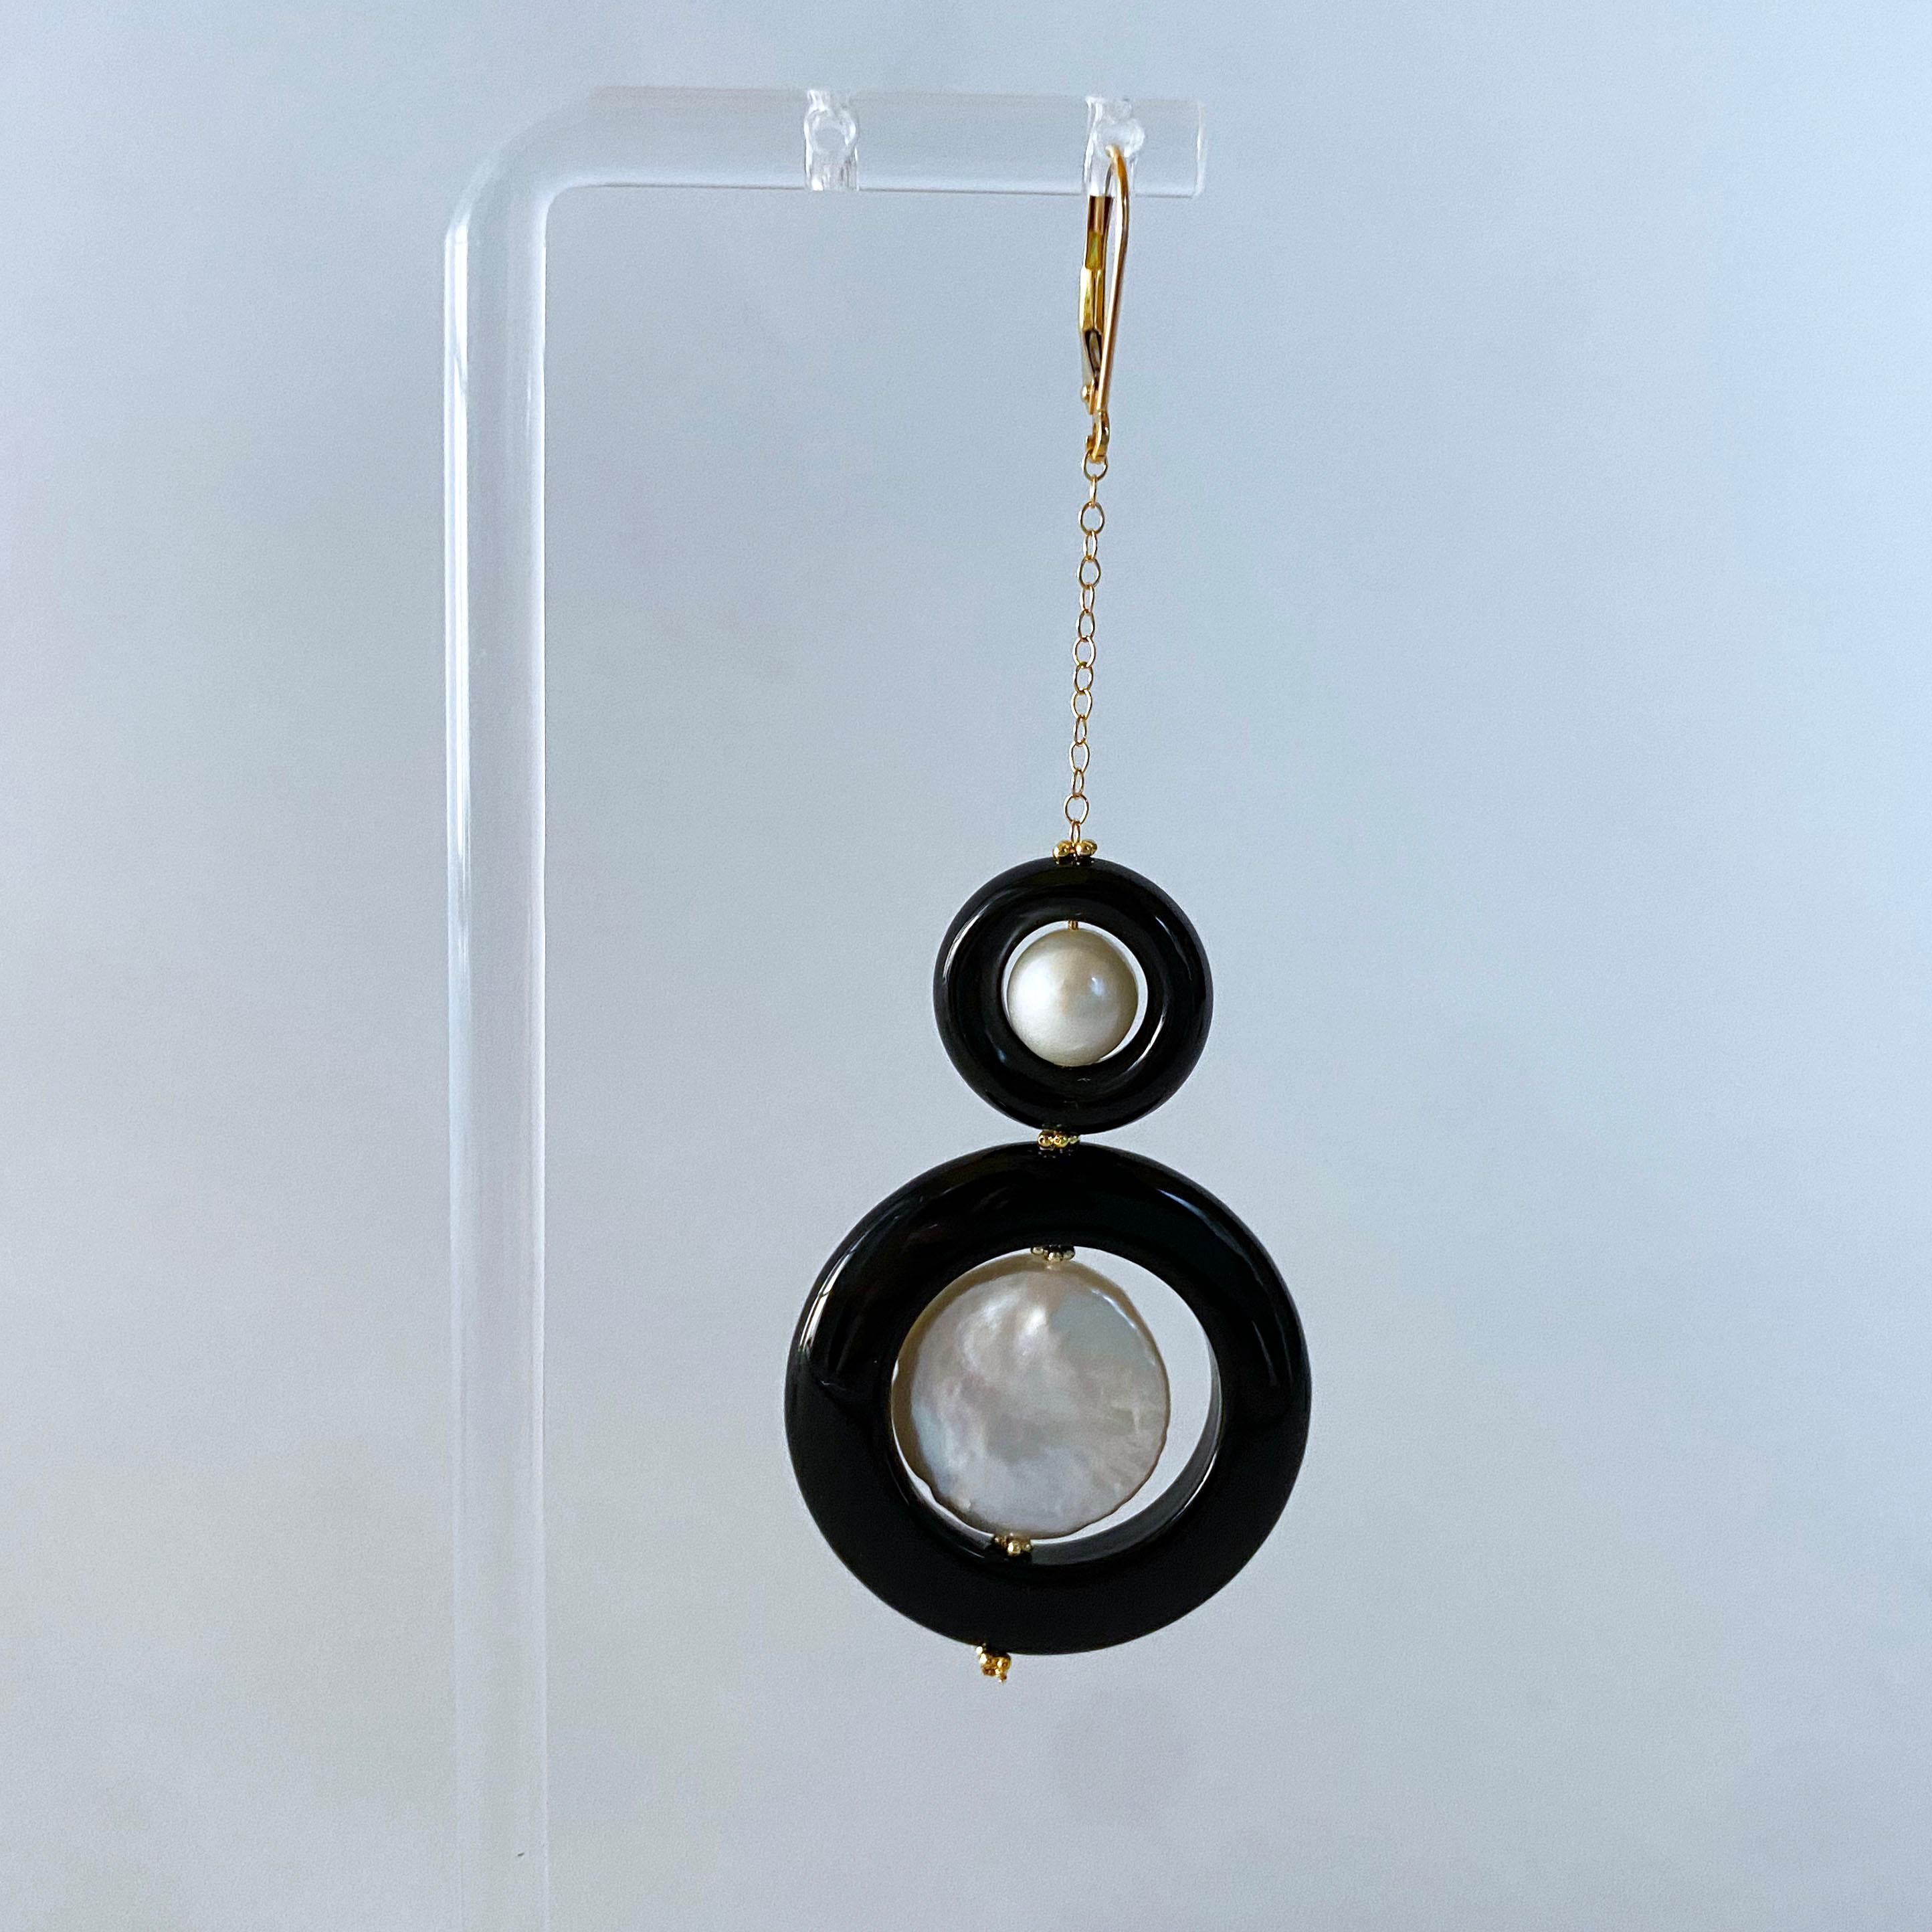 Classic pair of Earrings by Marina J. This pair is made of all Solid 14k Yellow Gold wiring, chain and Lever Back Hooks. A Graudated set of Pearl sitting in Black Onyx  hang off solid 14k Yellow Gold chain which attaches itself to a solid 14k Yellow